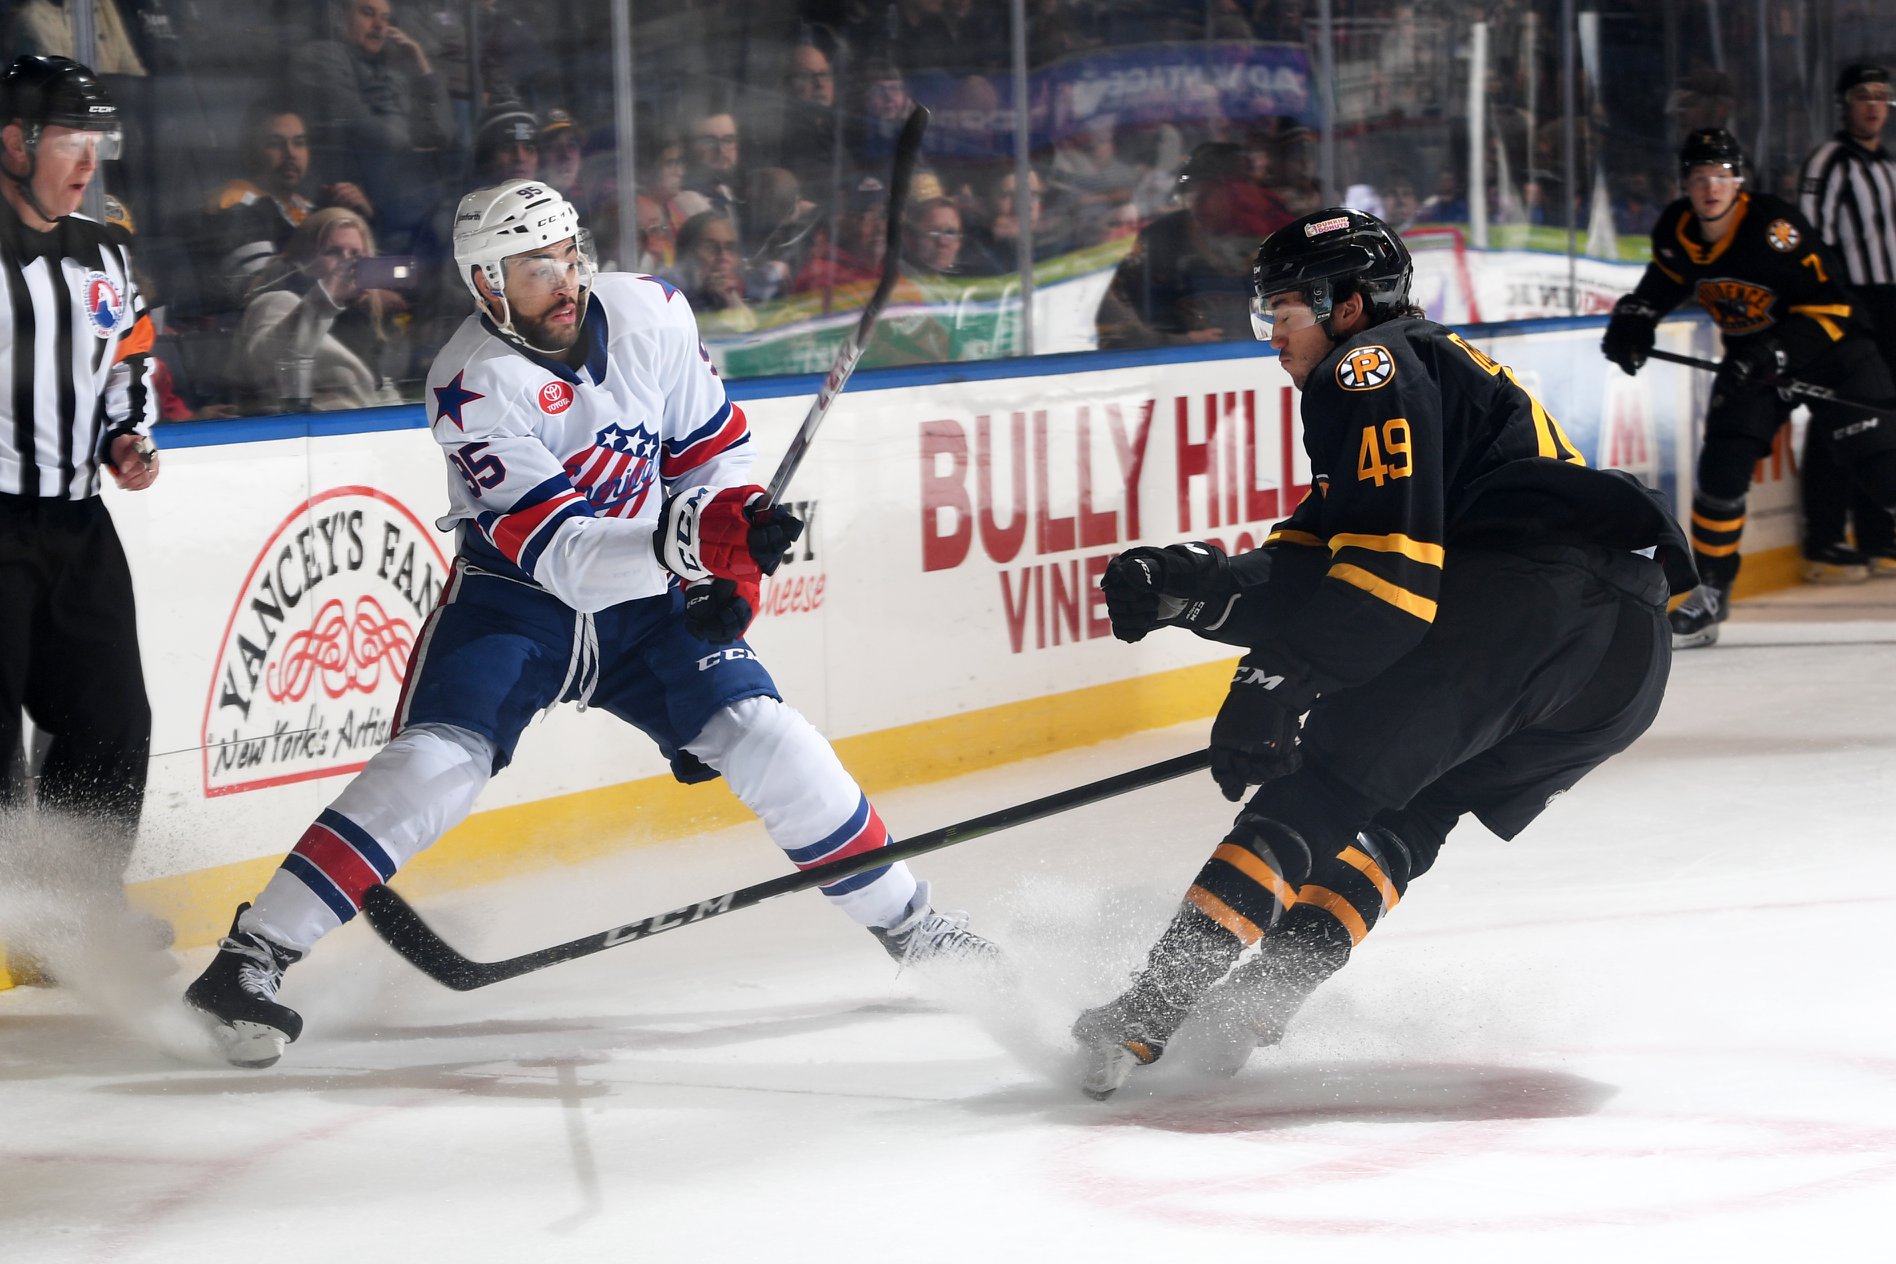 Bailey and Johansson Lead Amerks in a Lucky Win